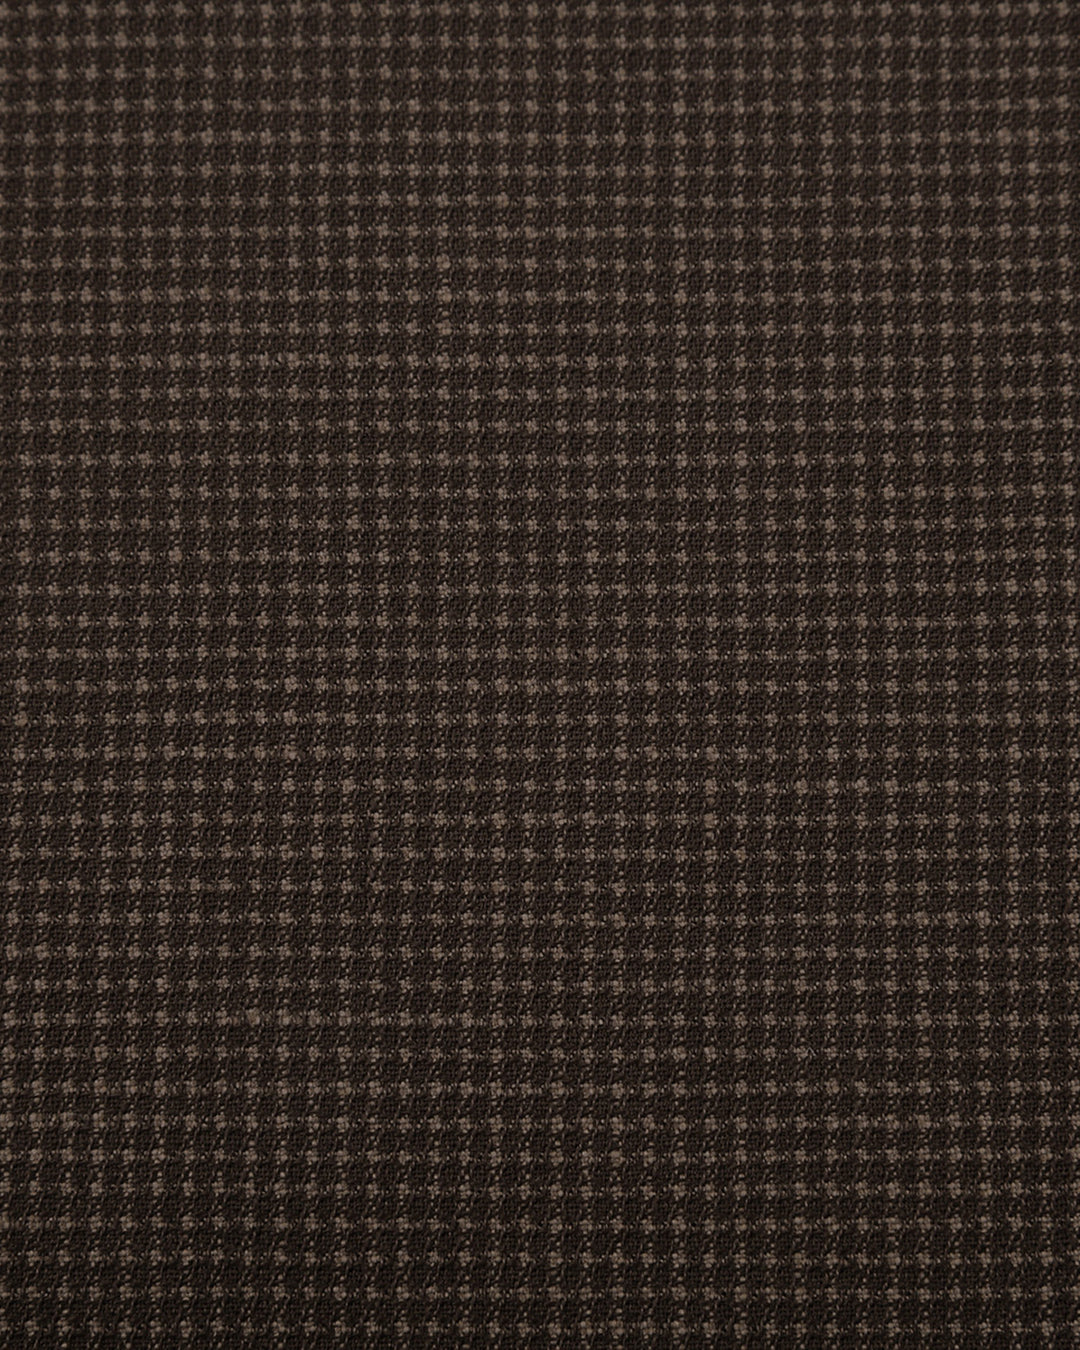 Drapers Tobacco Brown Micro Houndstooth Pants